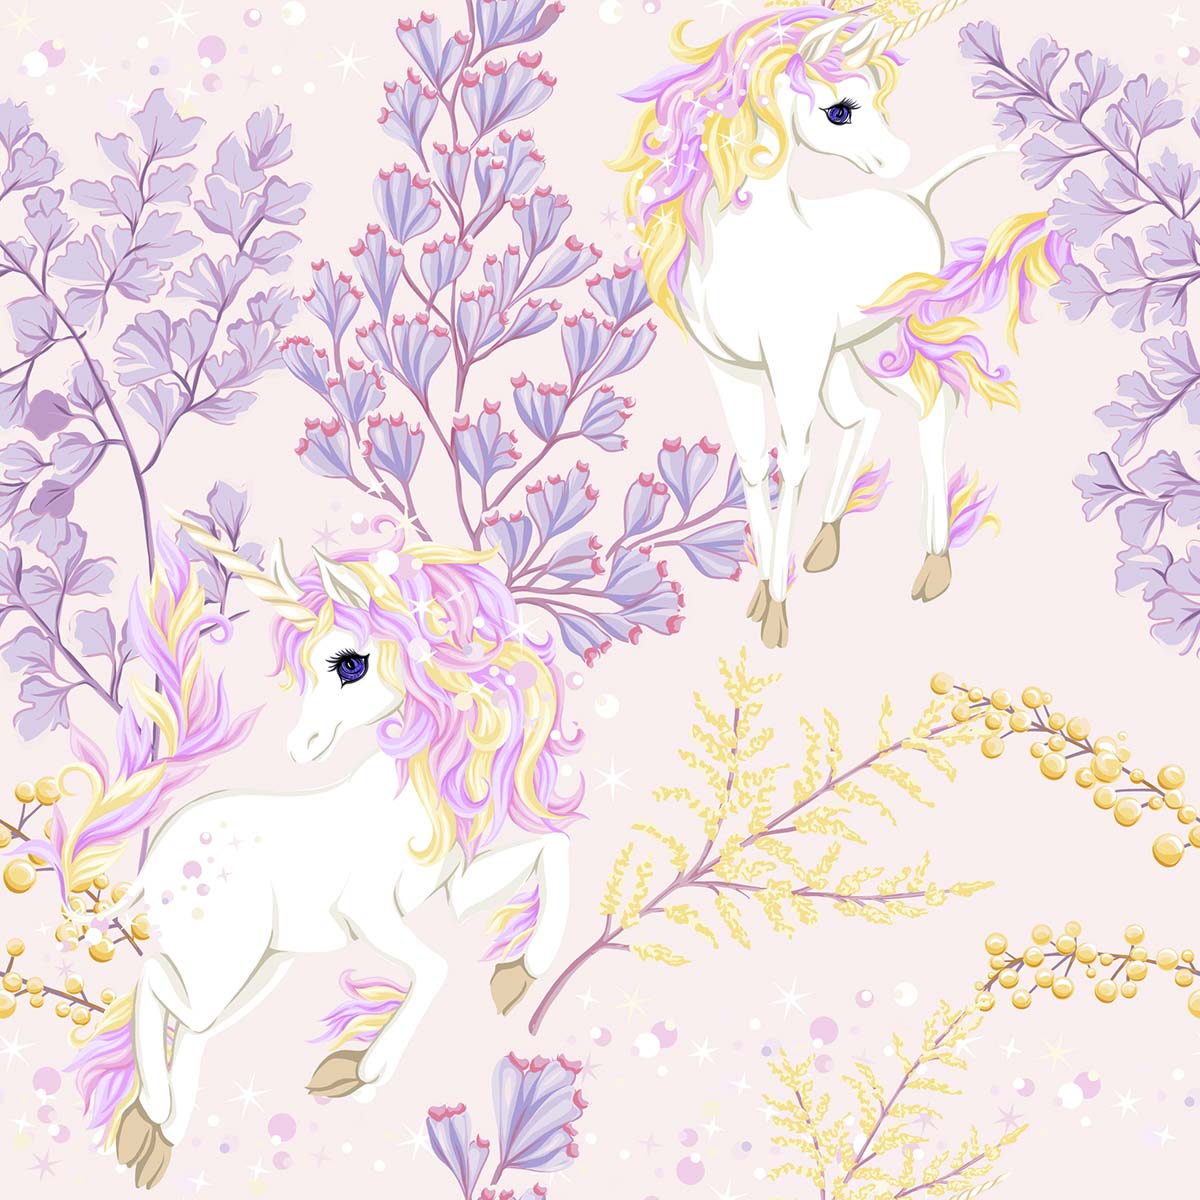 A unicorns and flowers